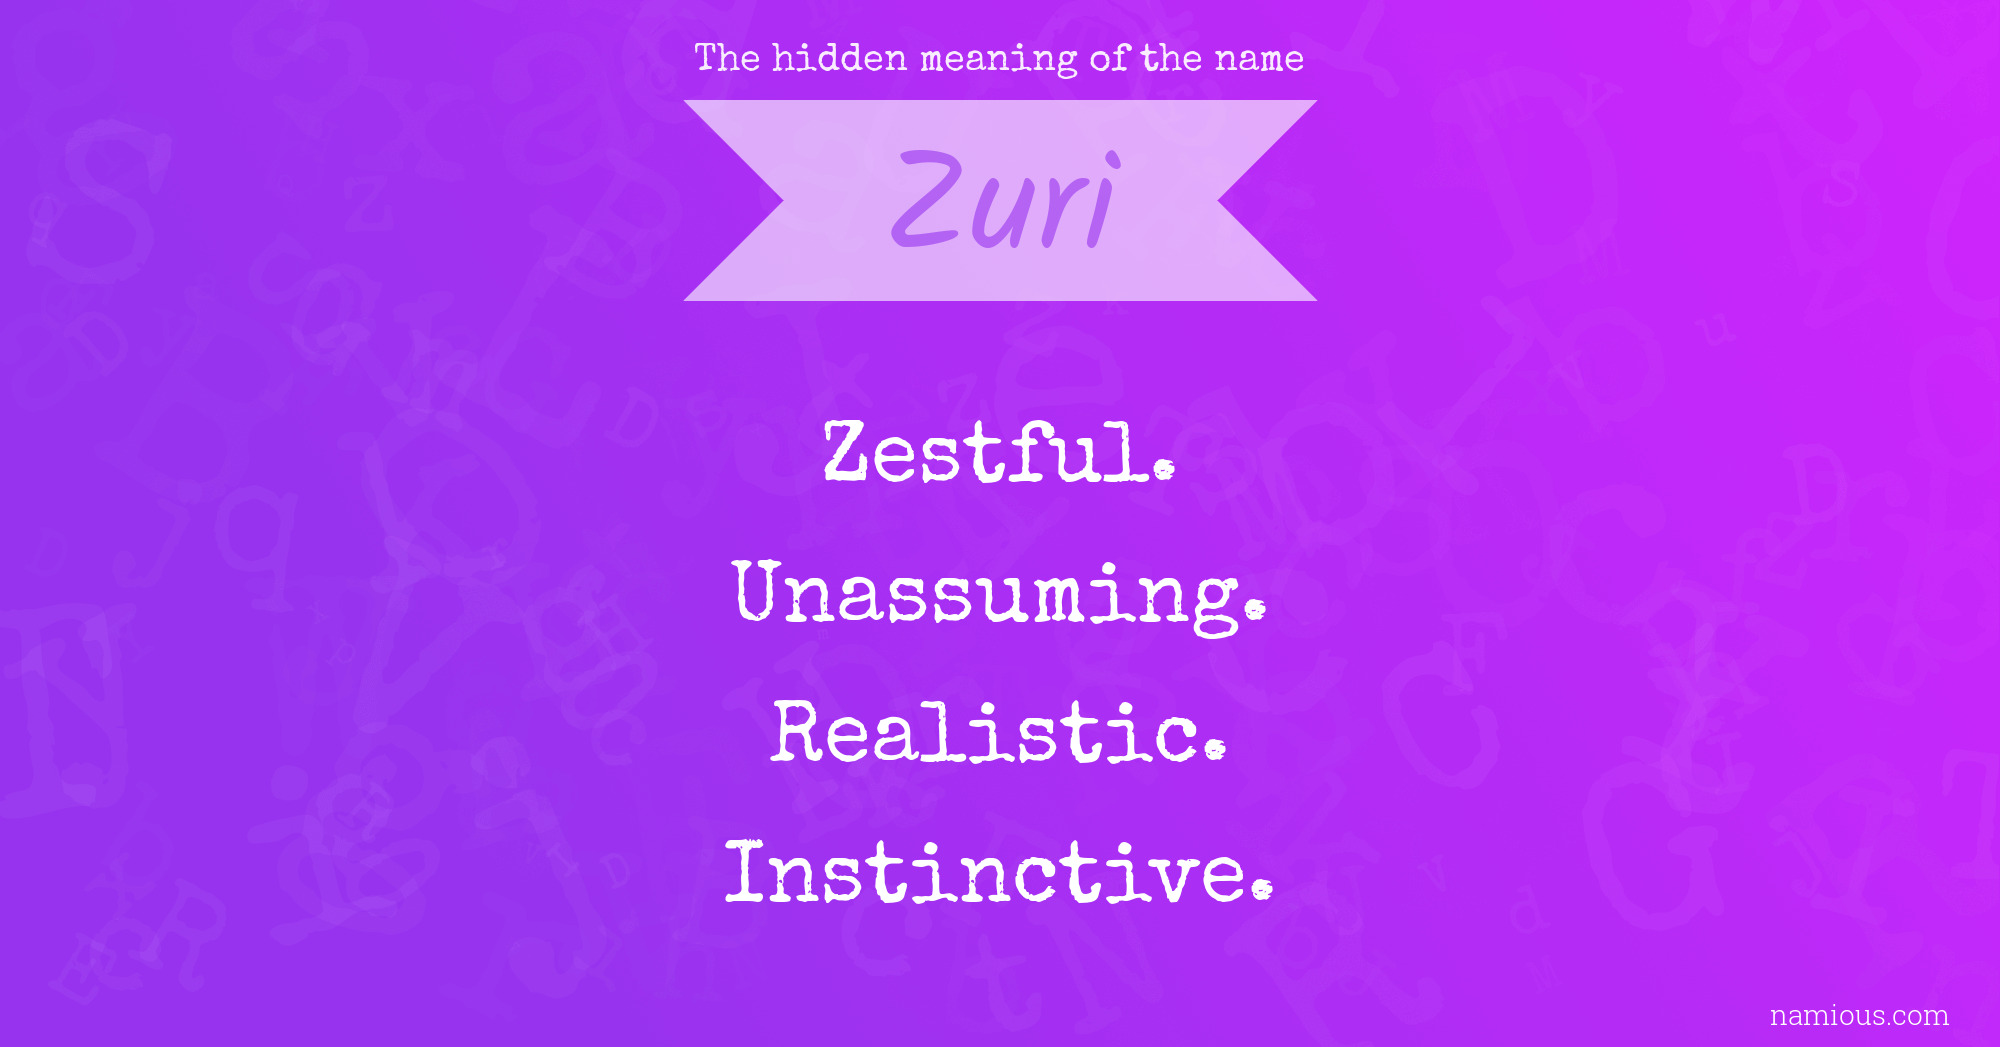 The hidden meaning of the name Zuri